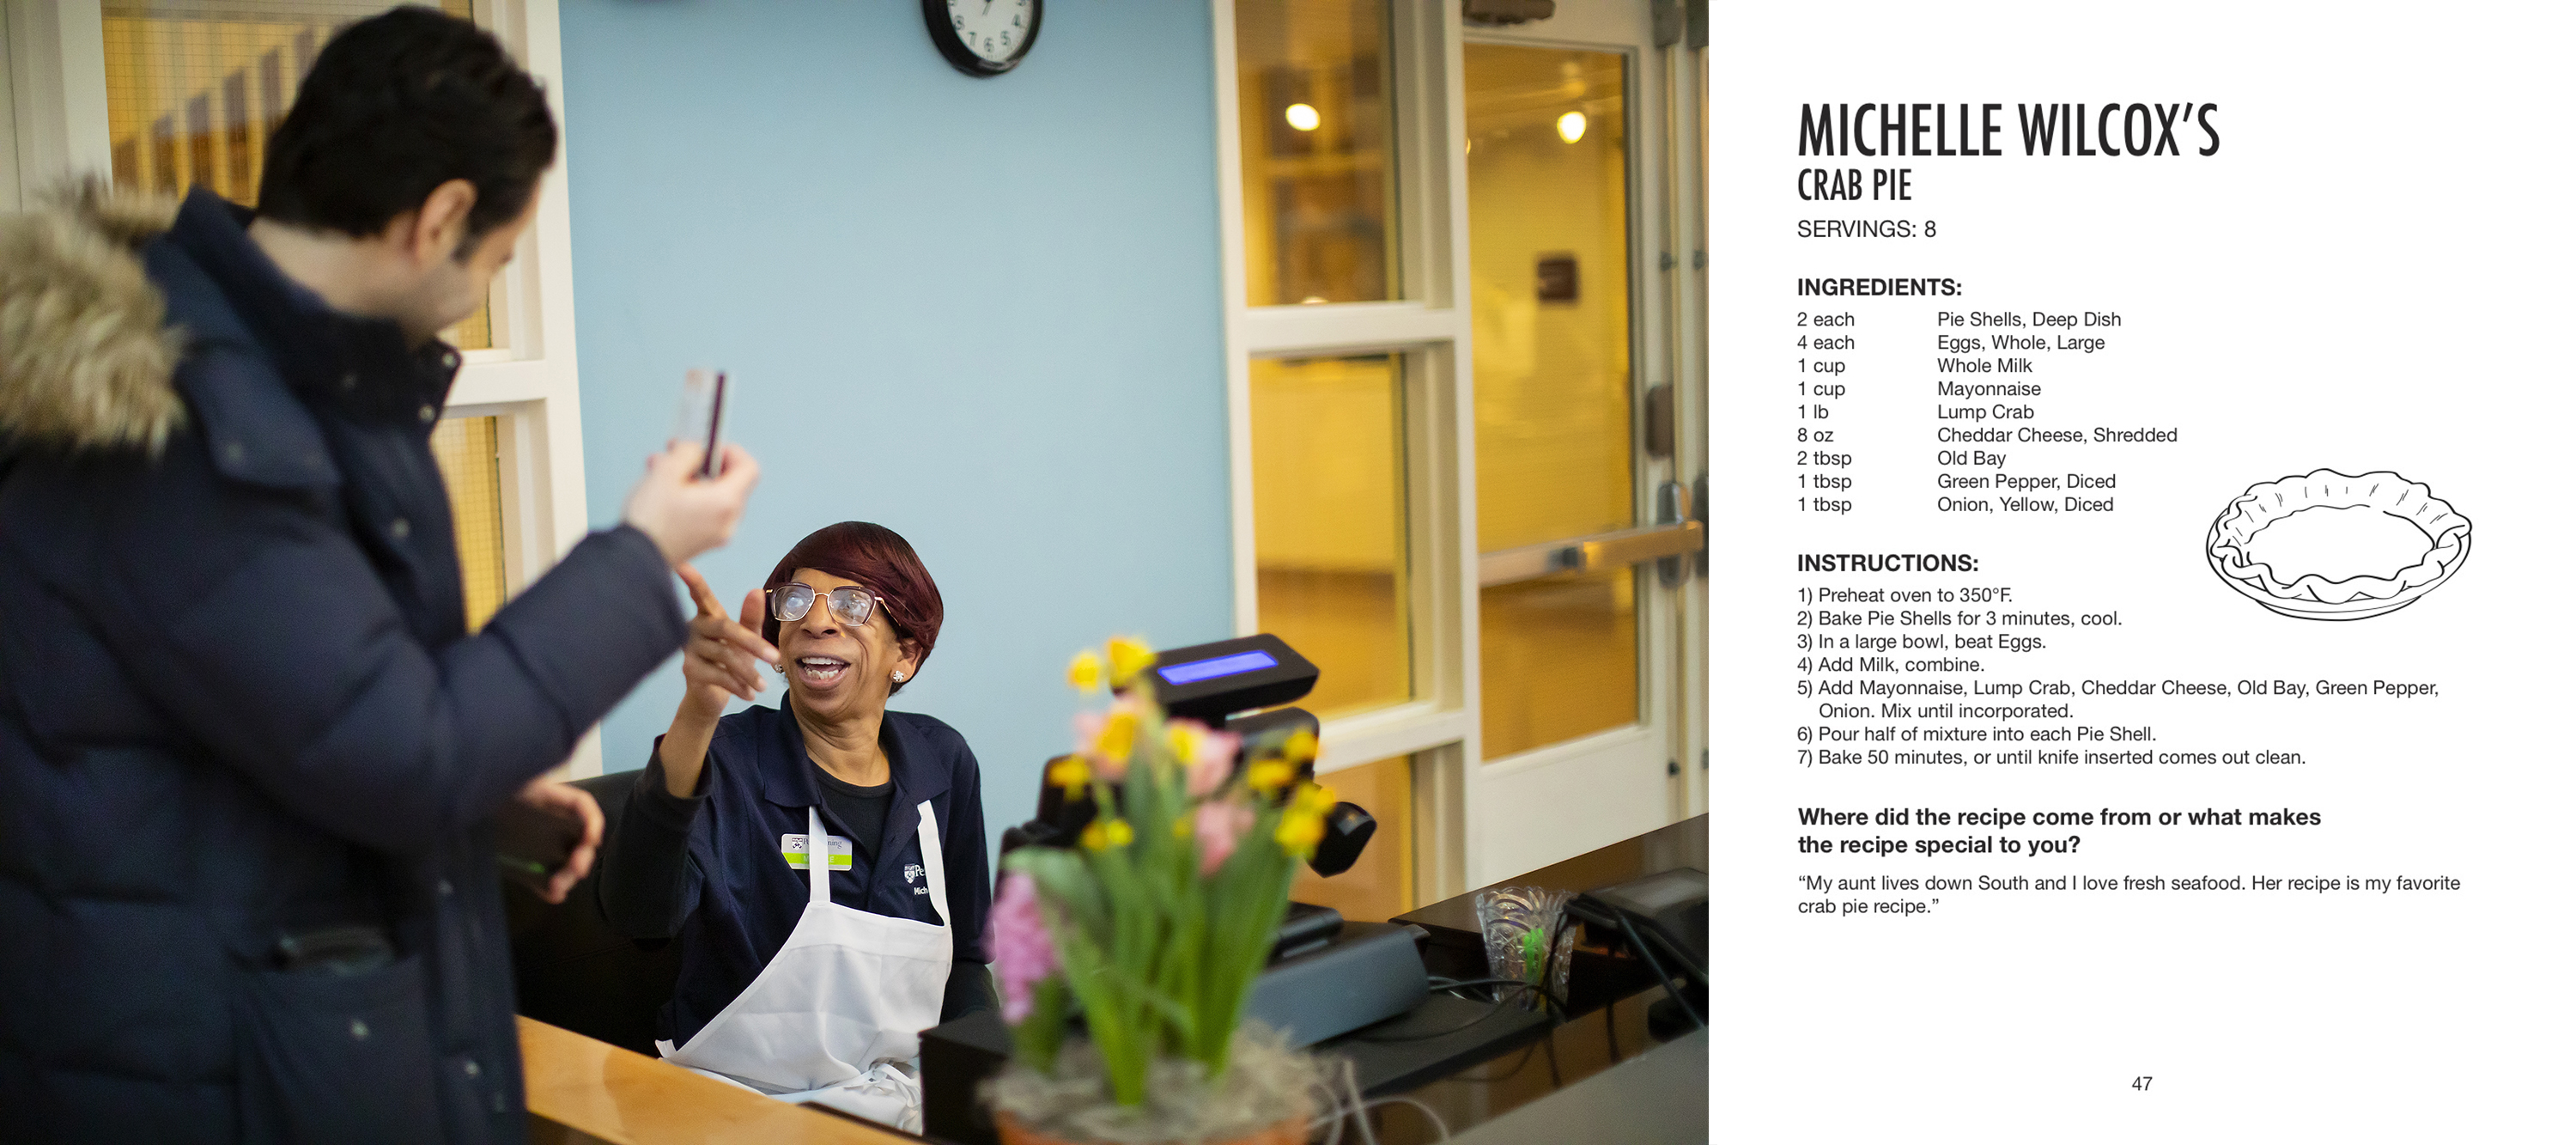 Michelle Wilcox, a cashier at a Penn dining hall, swipes dining card for student.